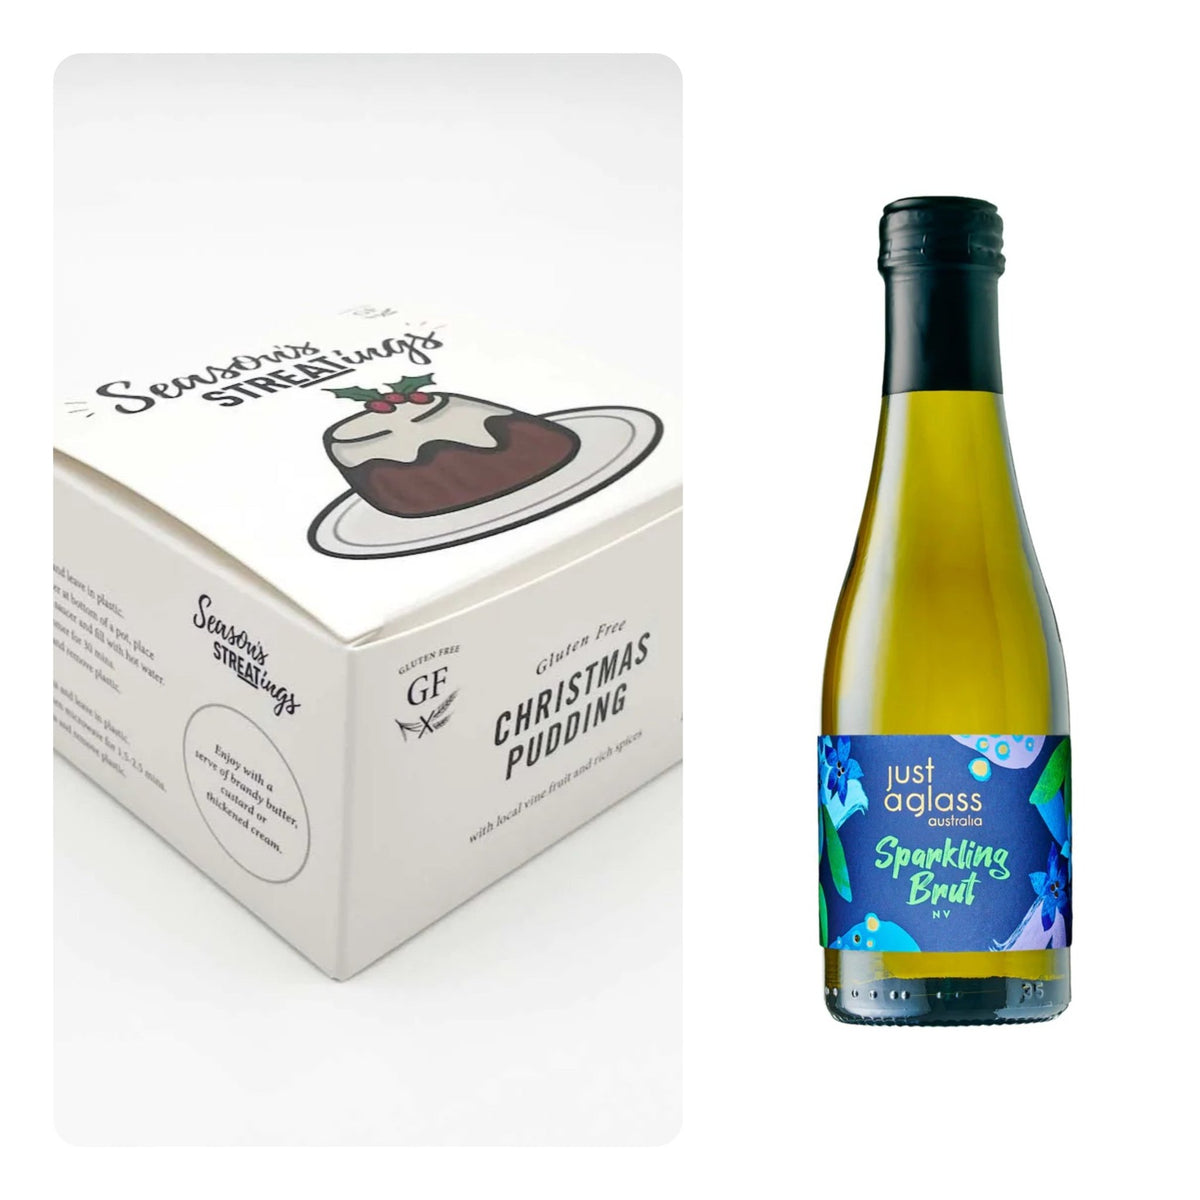 PookipoigaGluten Free Christmas Gift Hamper for $30 #same day gift delivery melbourne#